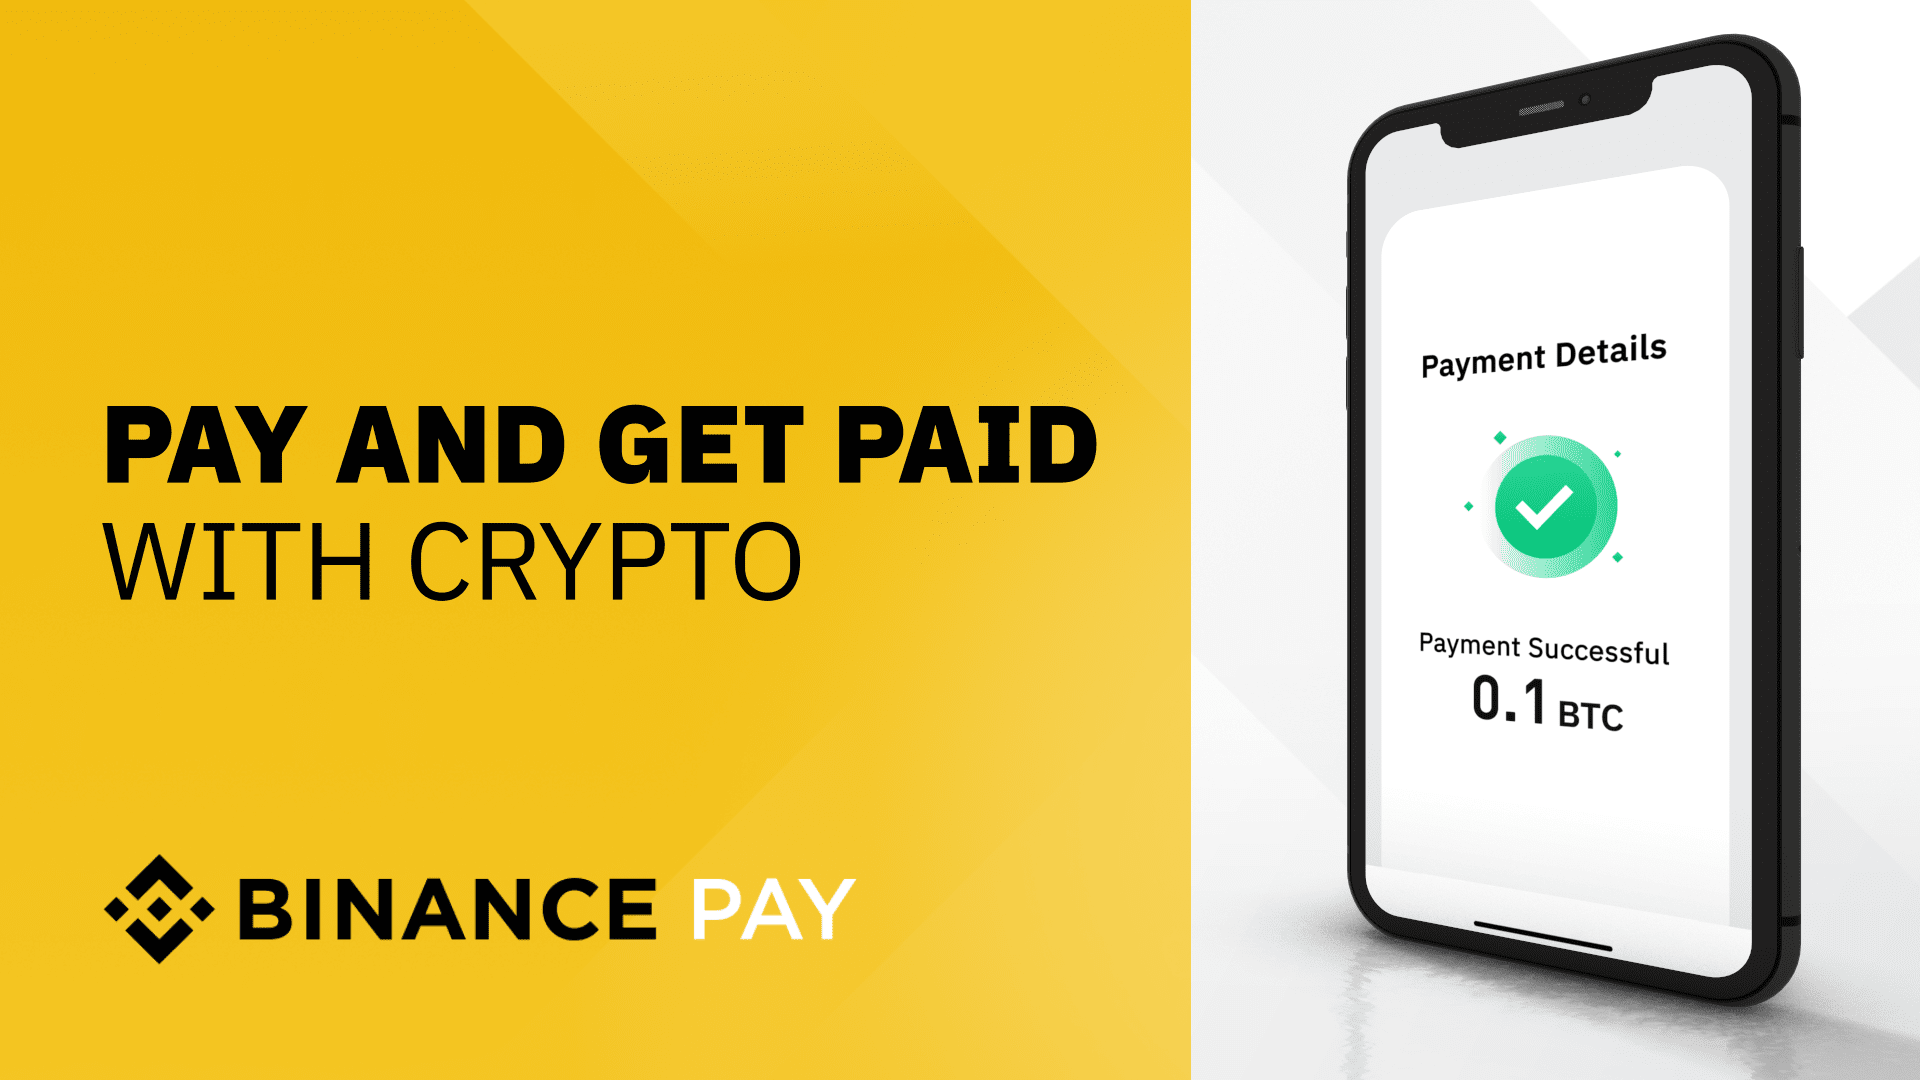 binance accepted payment methods